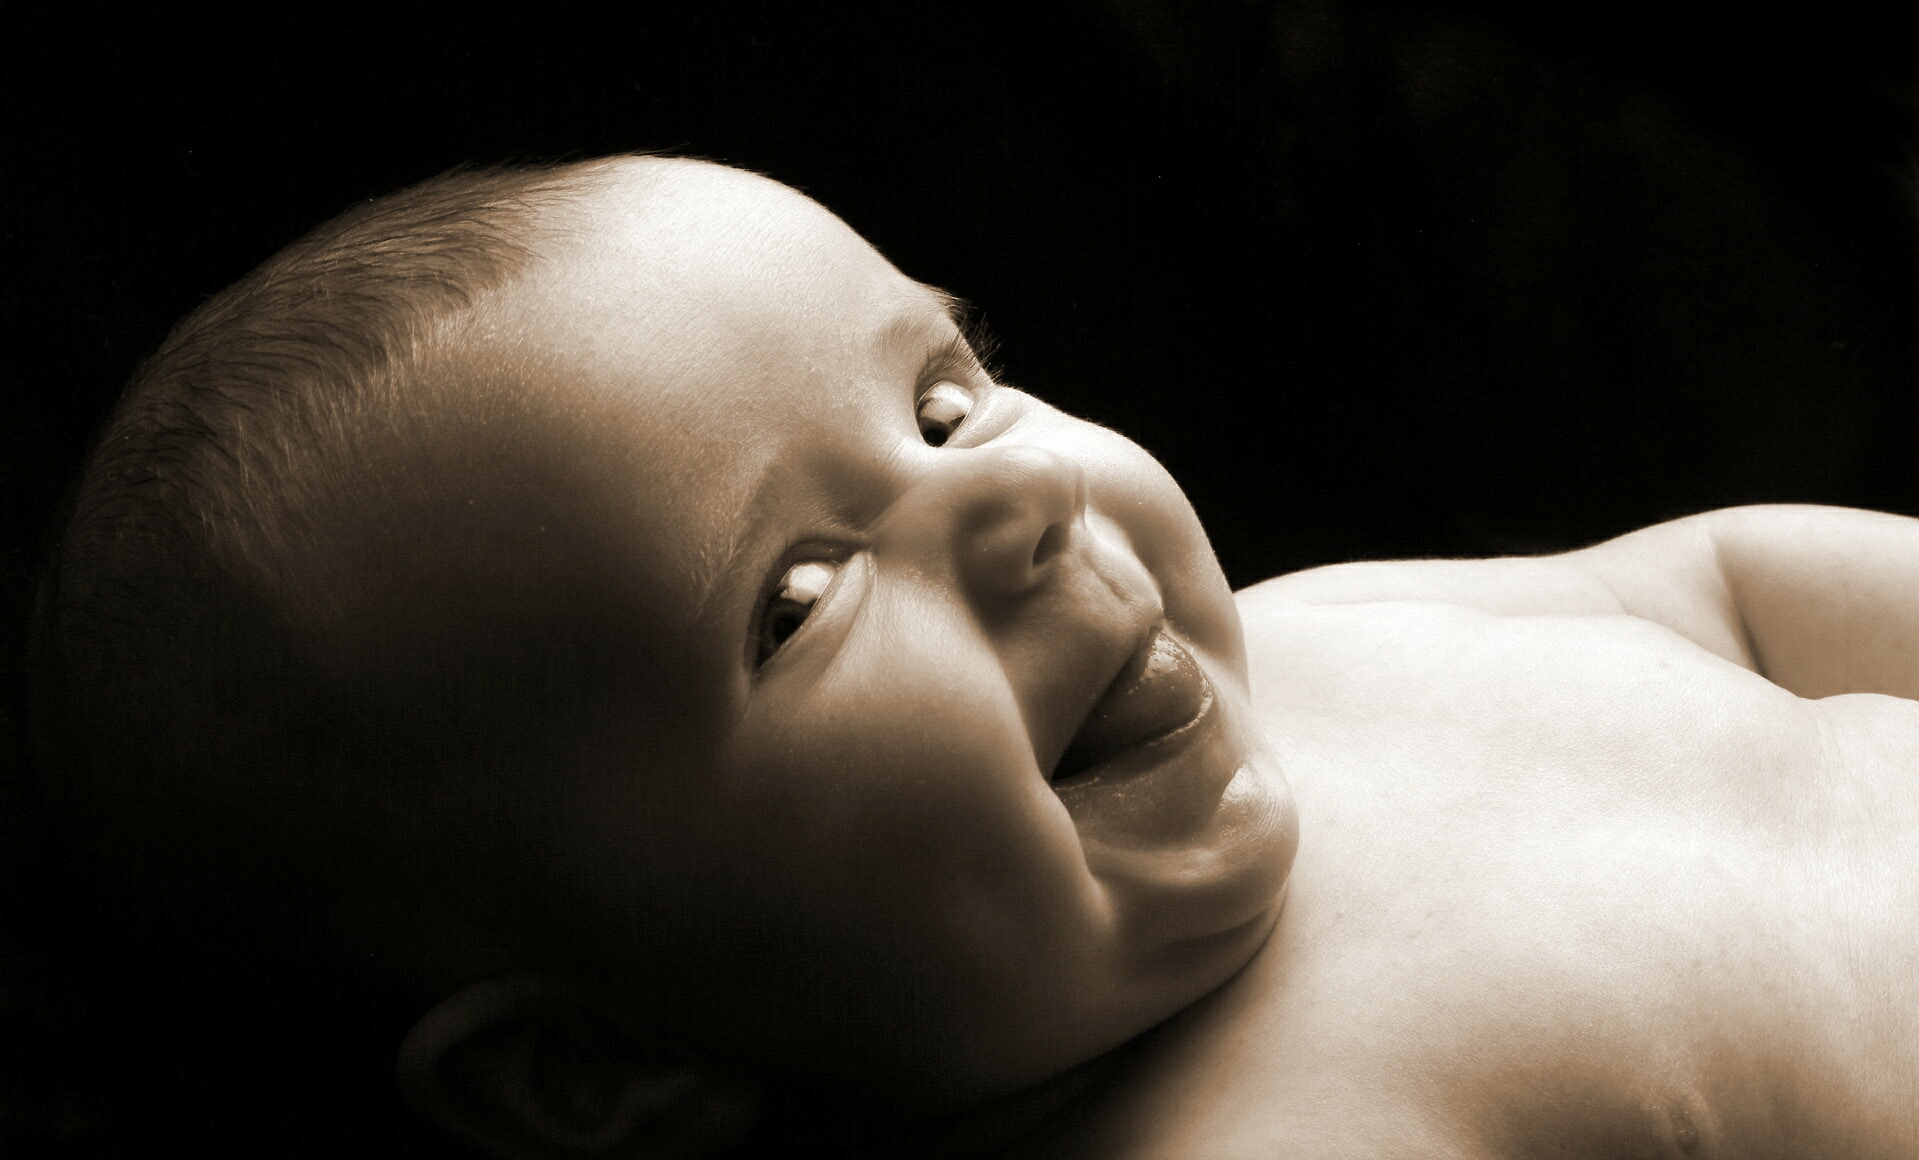 Free download wallpaper Photography, Baby on your PC desktop